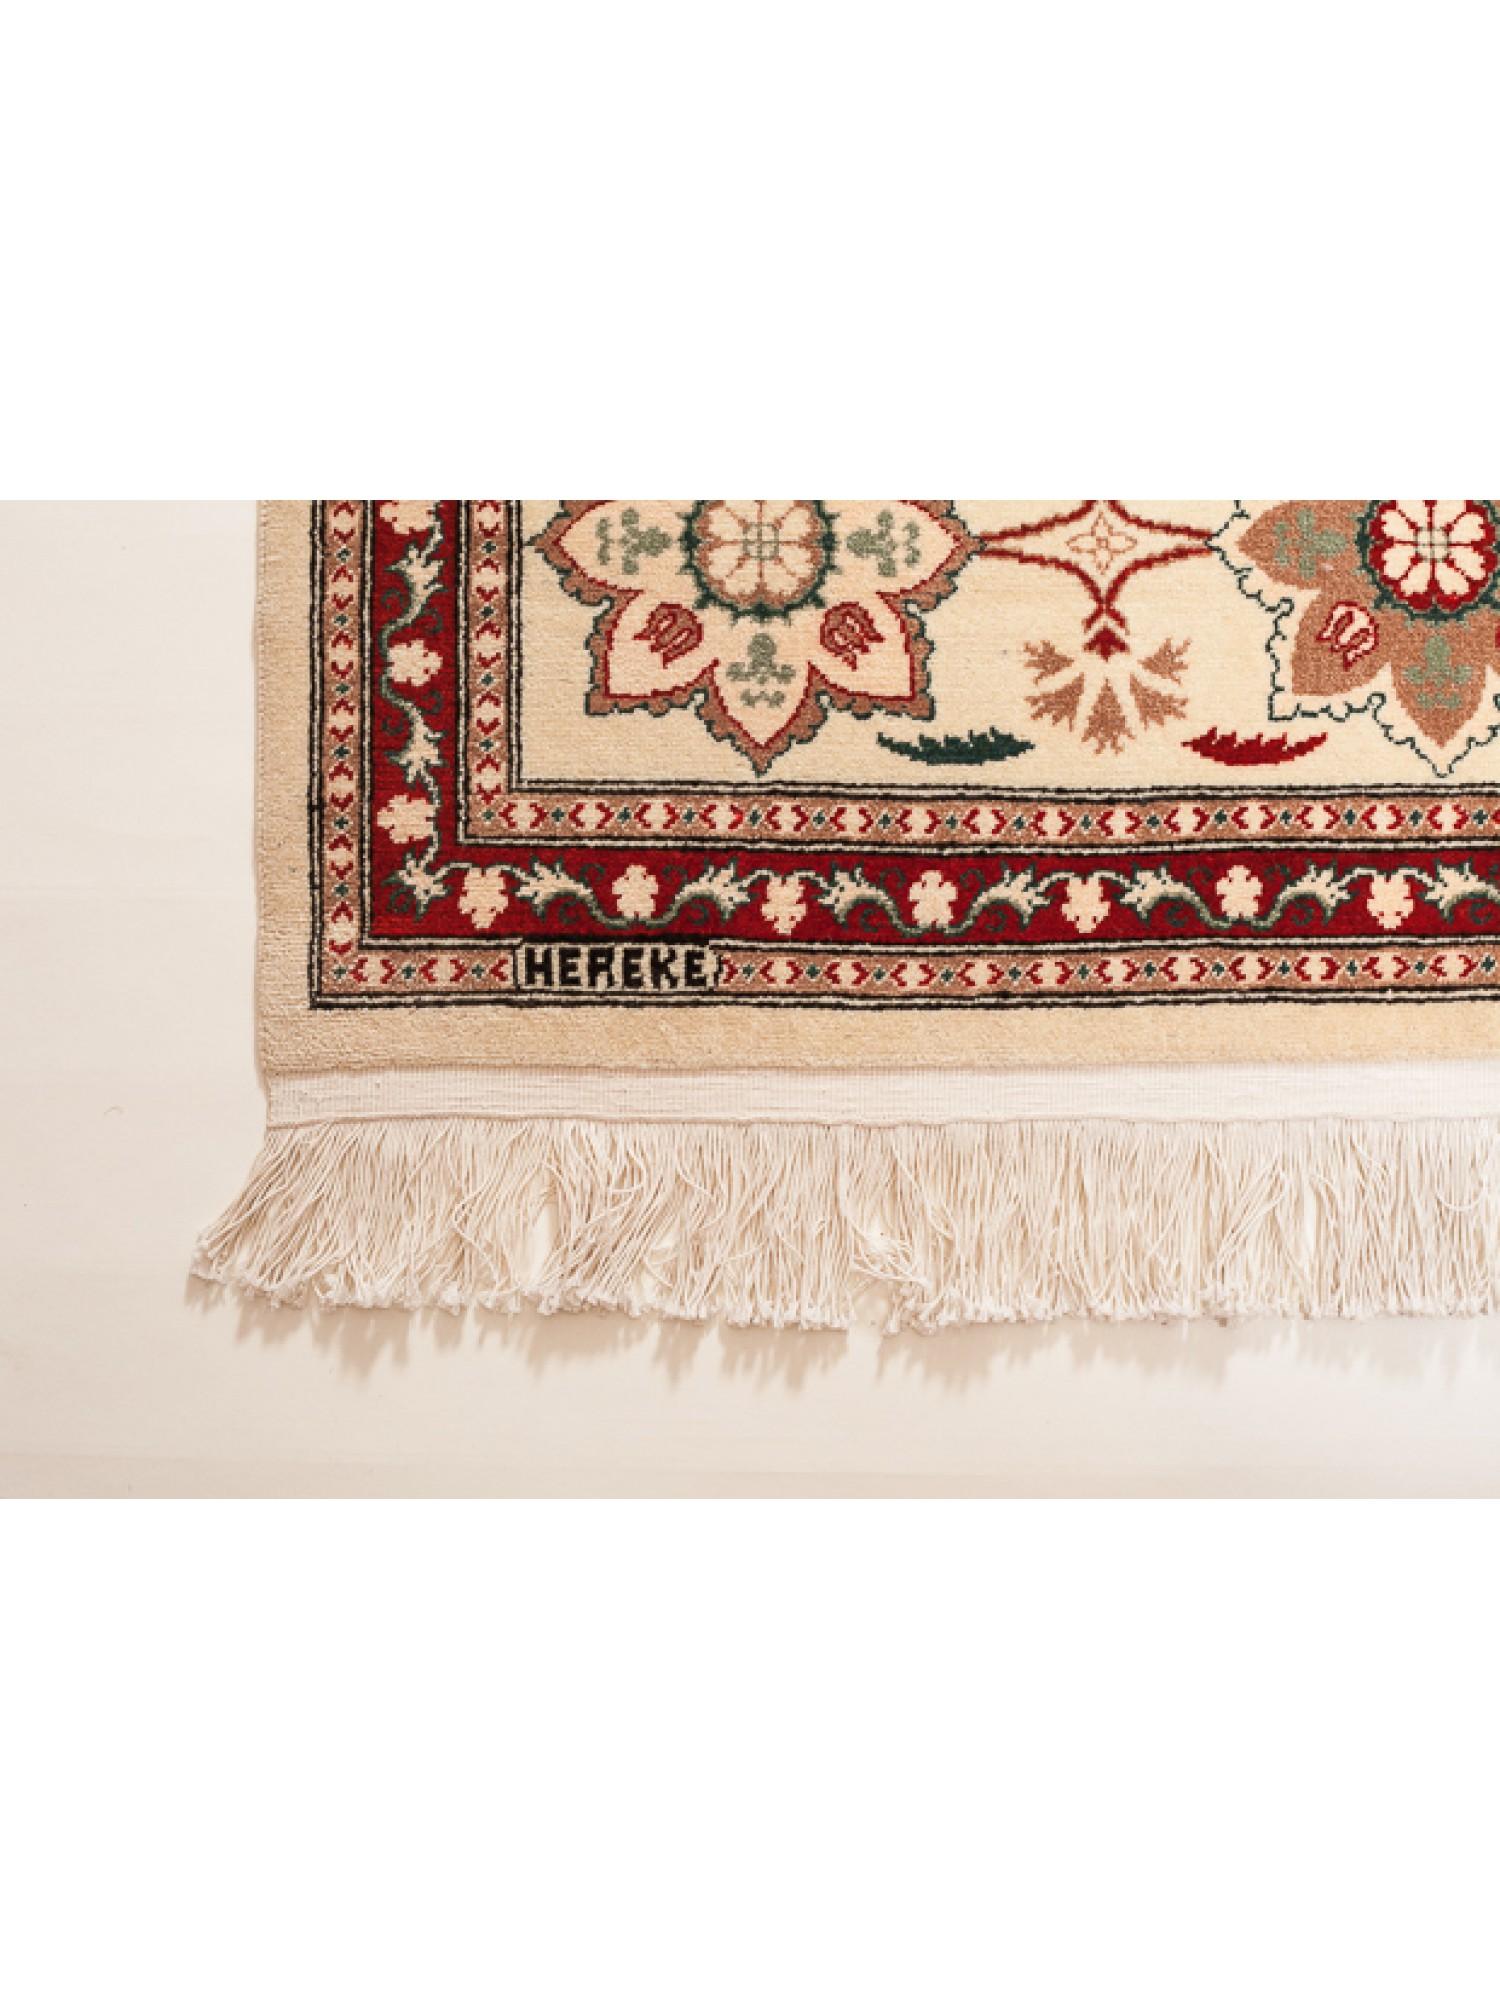 This unique Wool Hereke Carpet is among the highest-quality carpets in the Hereke workshop. There are traditional Ottoman Empire carnations and tulip design rows on a white background with the fineness of the weave, the use of color, and the elegant